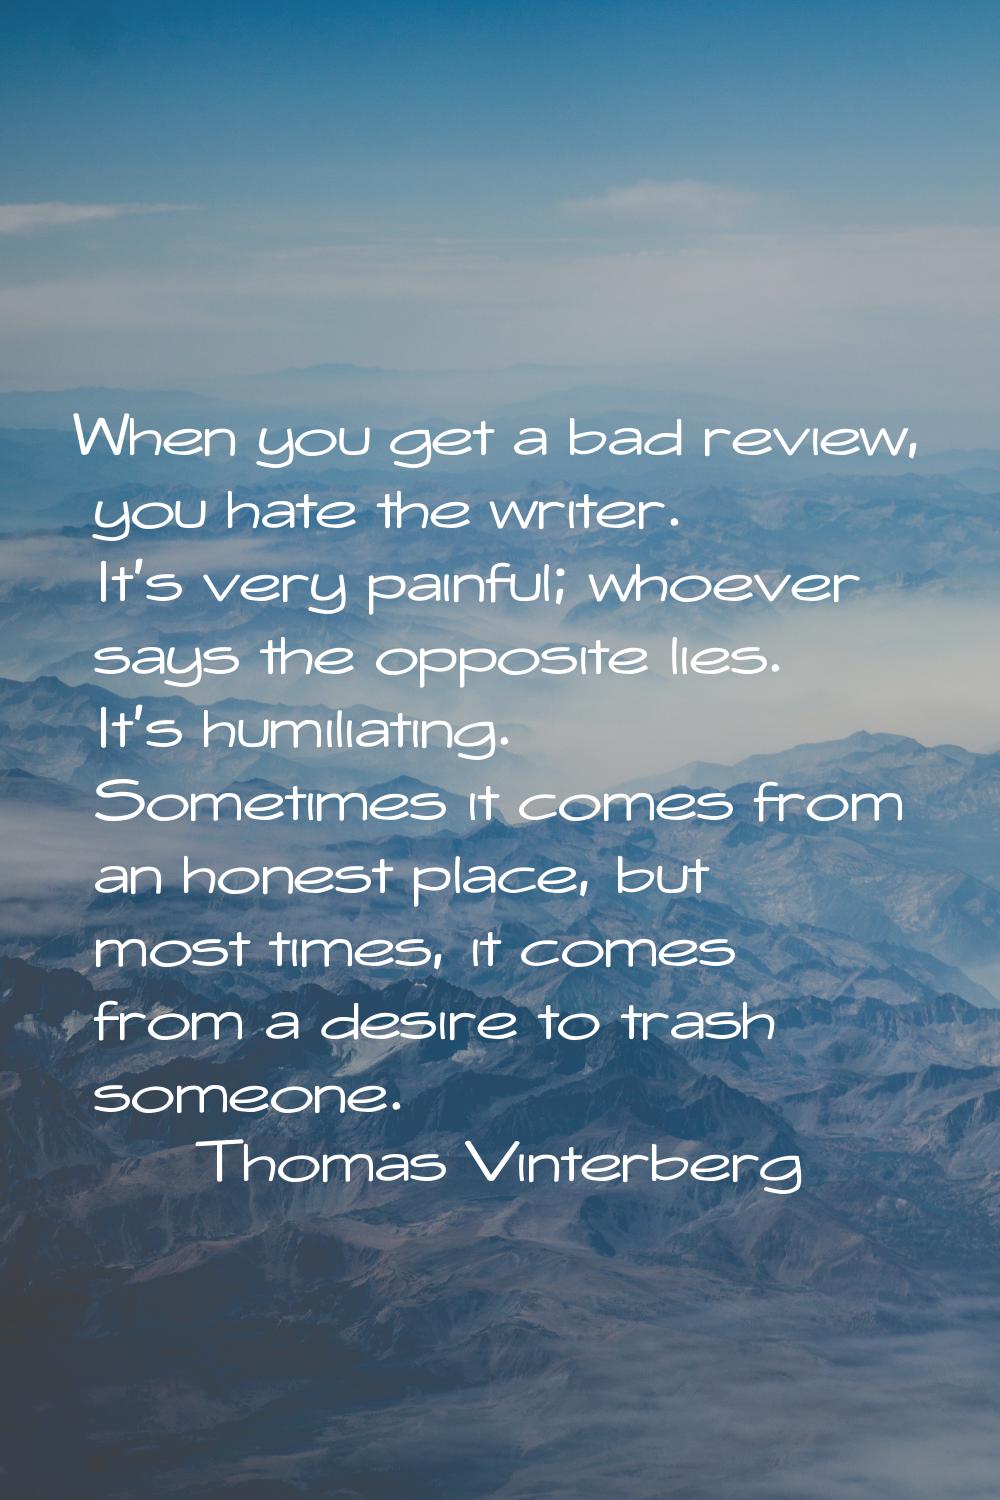 When you get a bad review, you hate the writer. It's very painful; whoever says the opposite lies. 